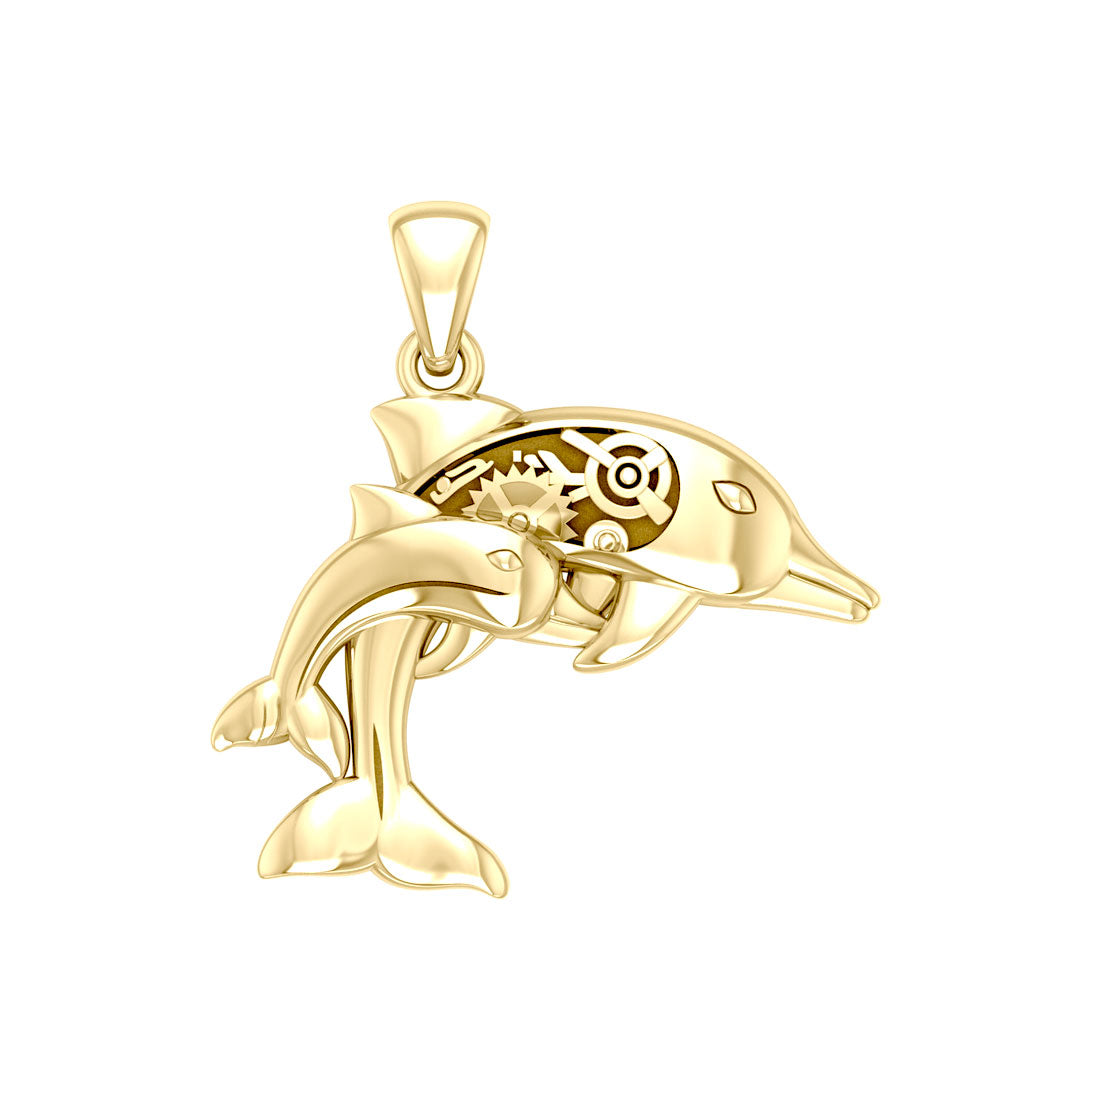 Gentle dolphins in steampunk ~  Solid Gold Jewelry Pendant with 14k Gold Accent GPD3929